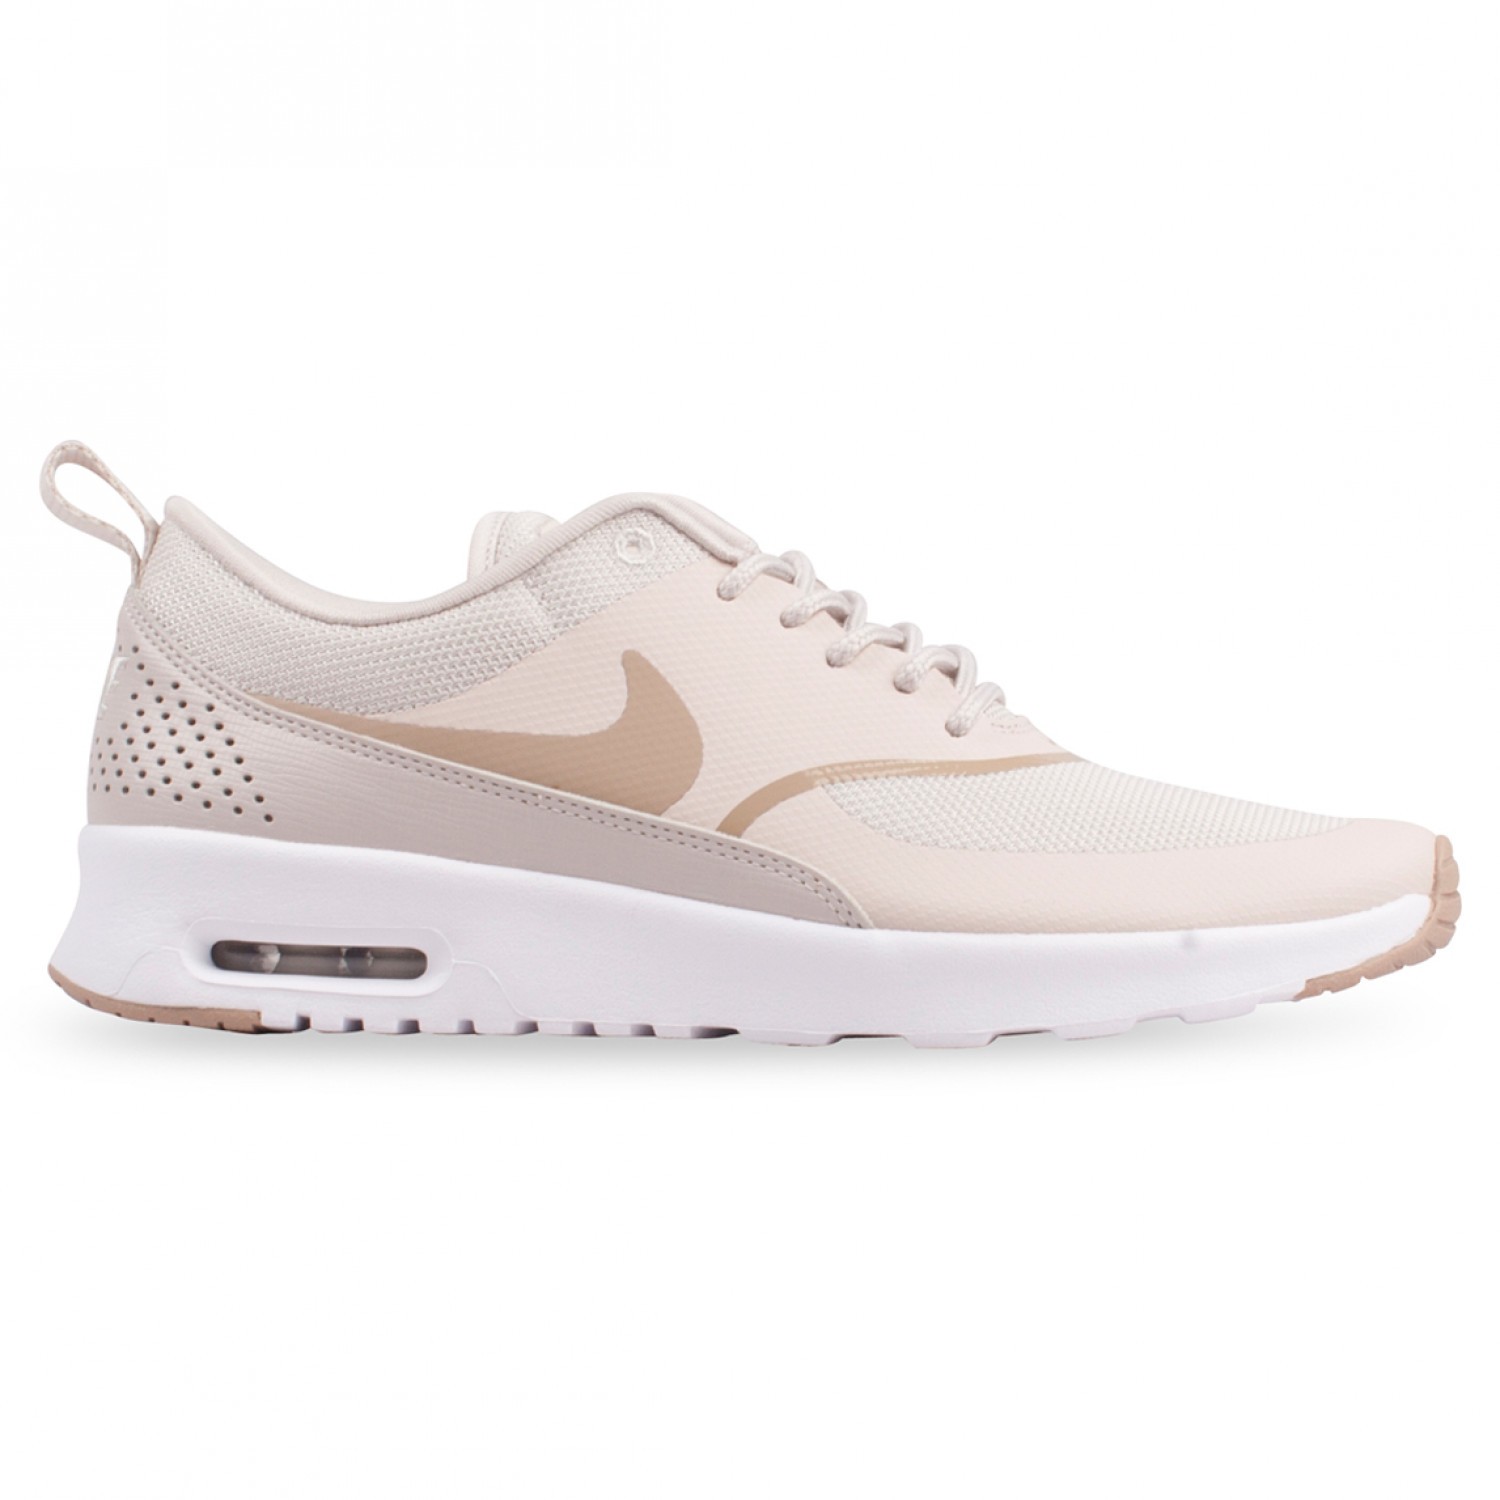 Air Max Thea Desert Sand Outlet Online 